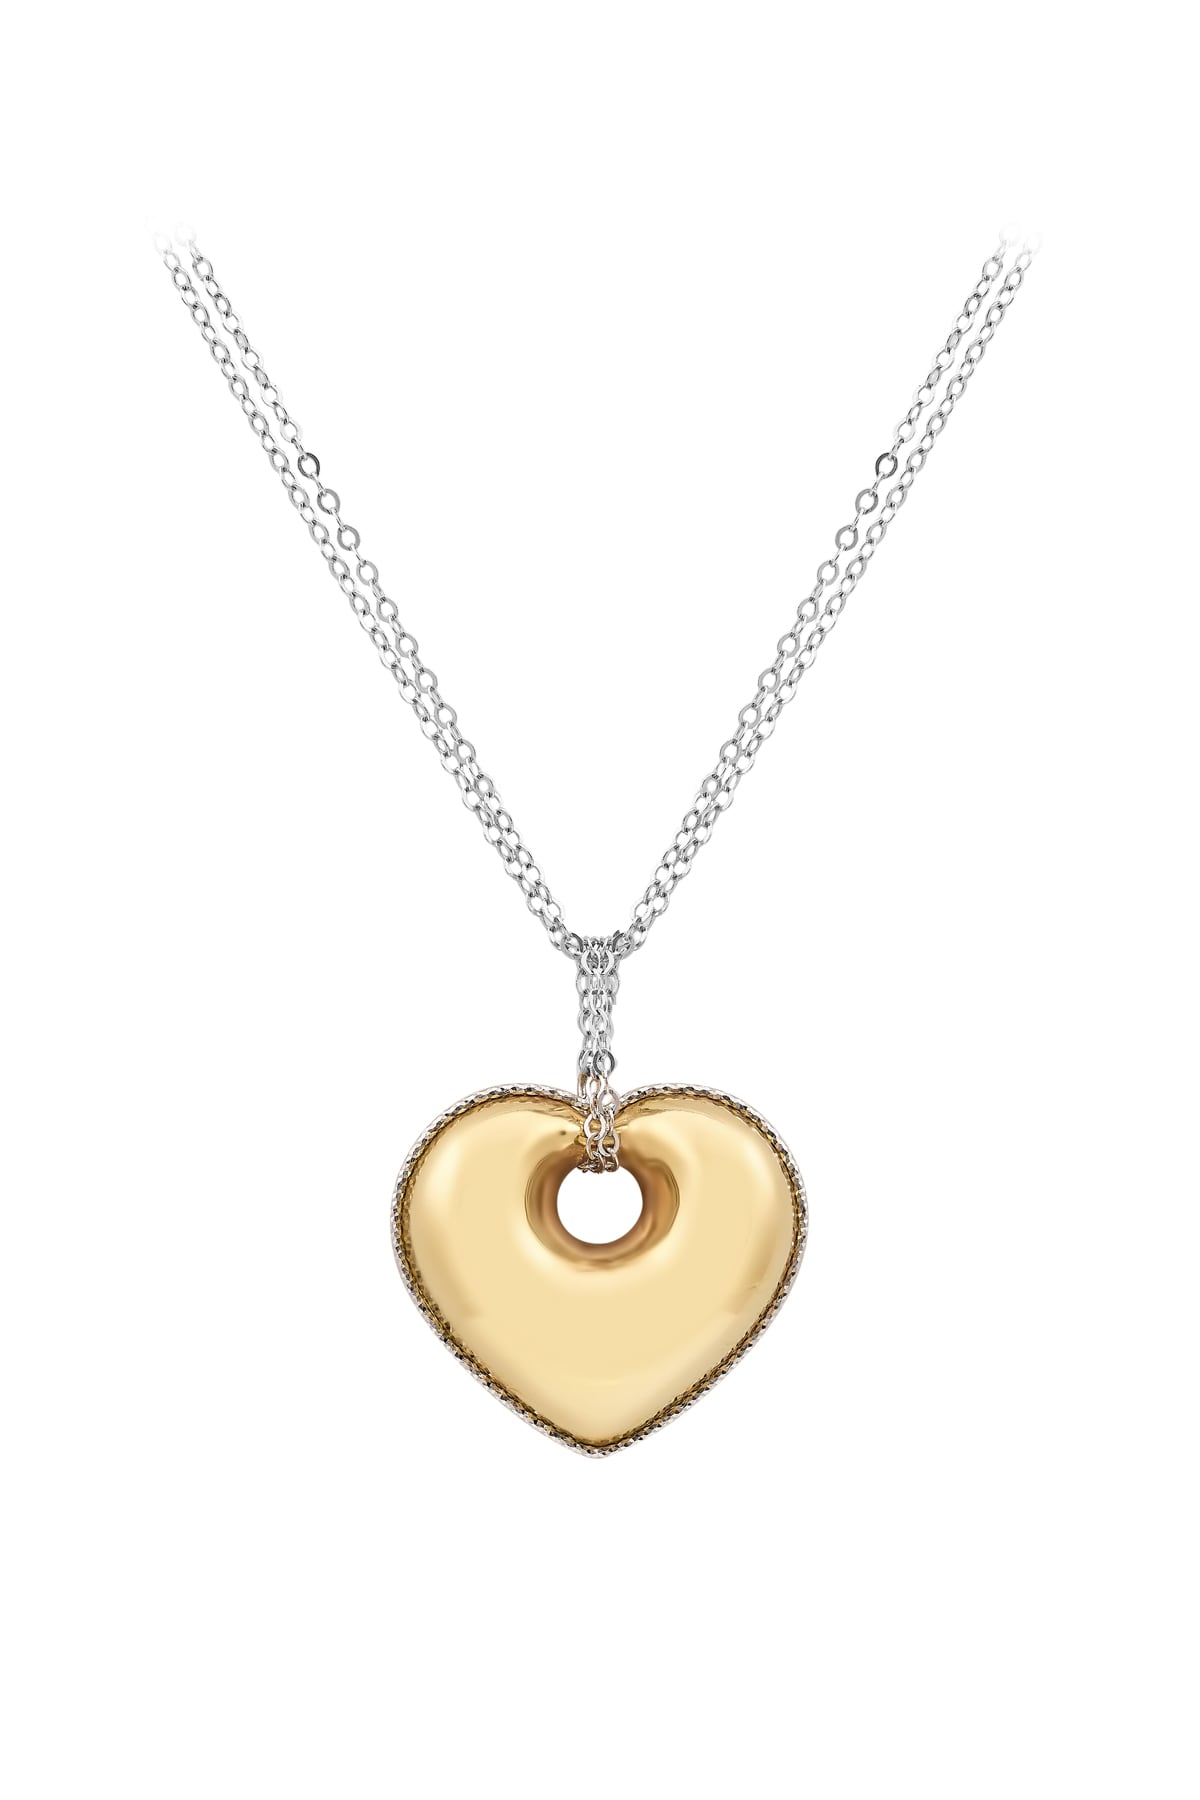 Heart Pendant In 14ct Yellow And White Gold from LeGassick.